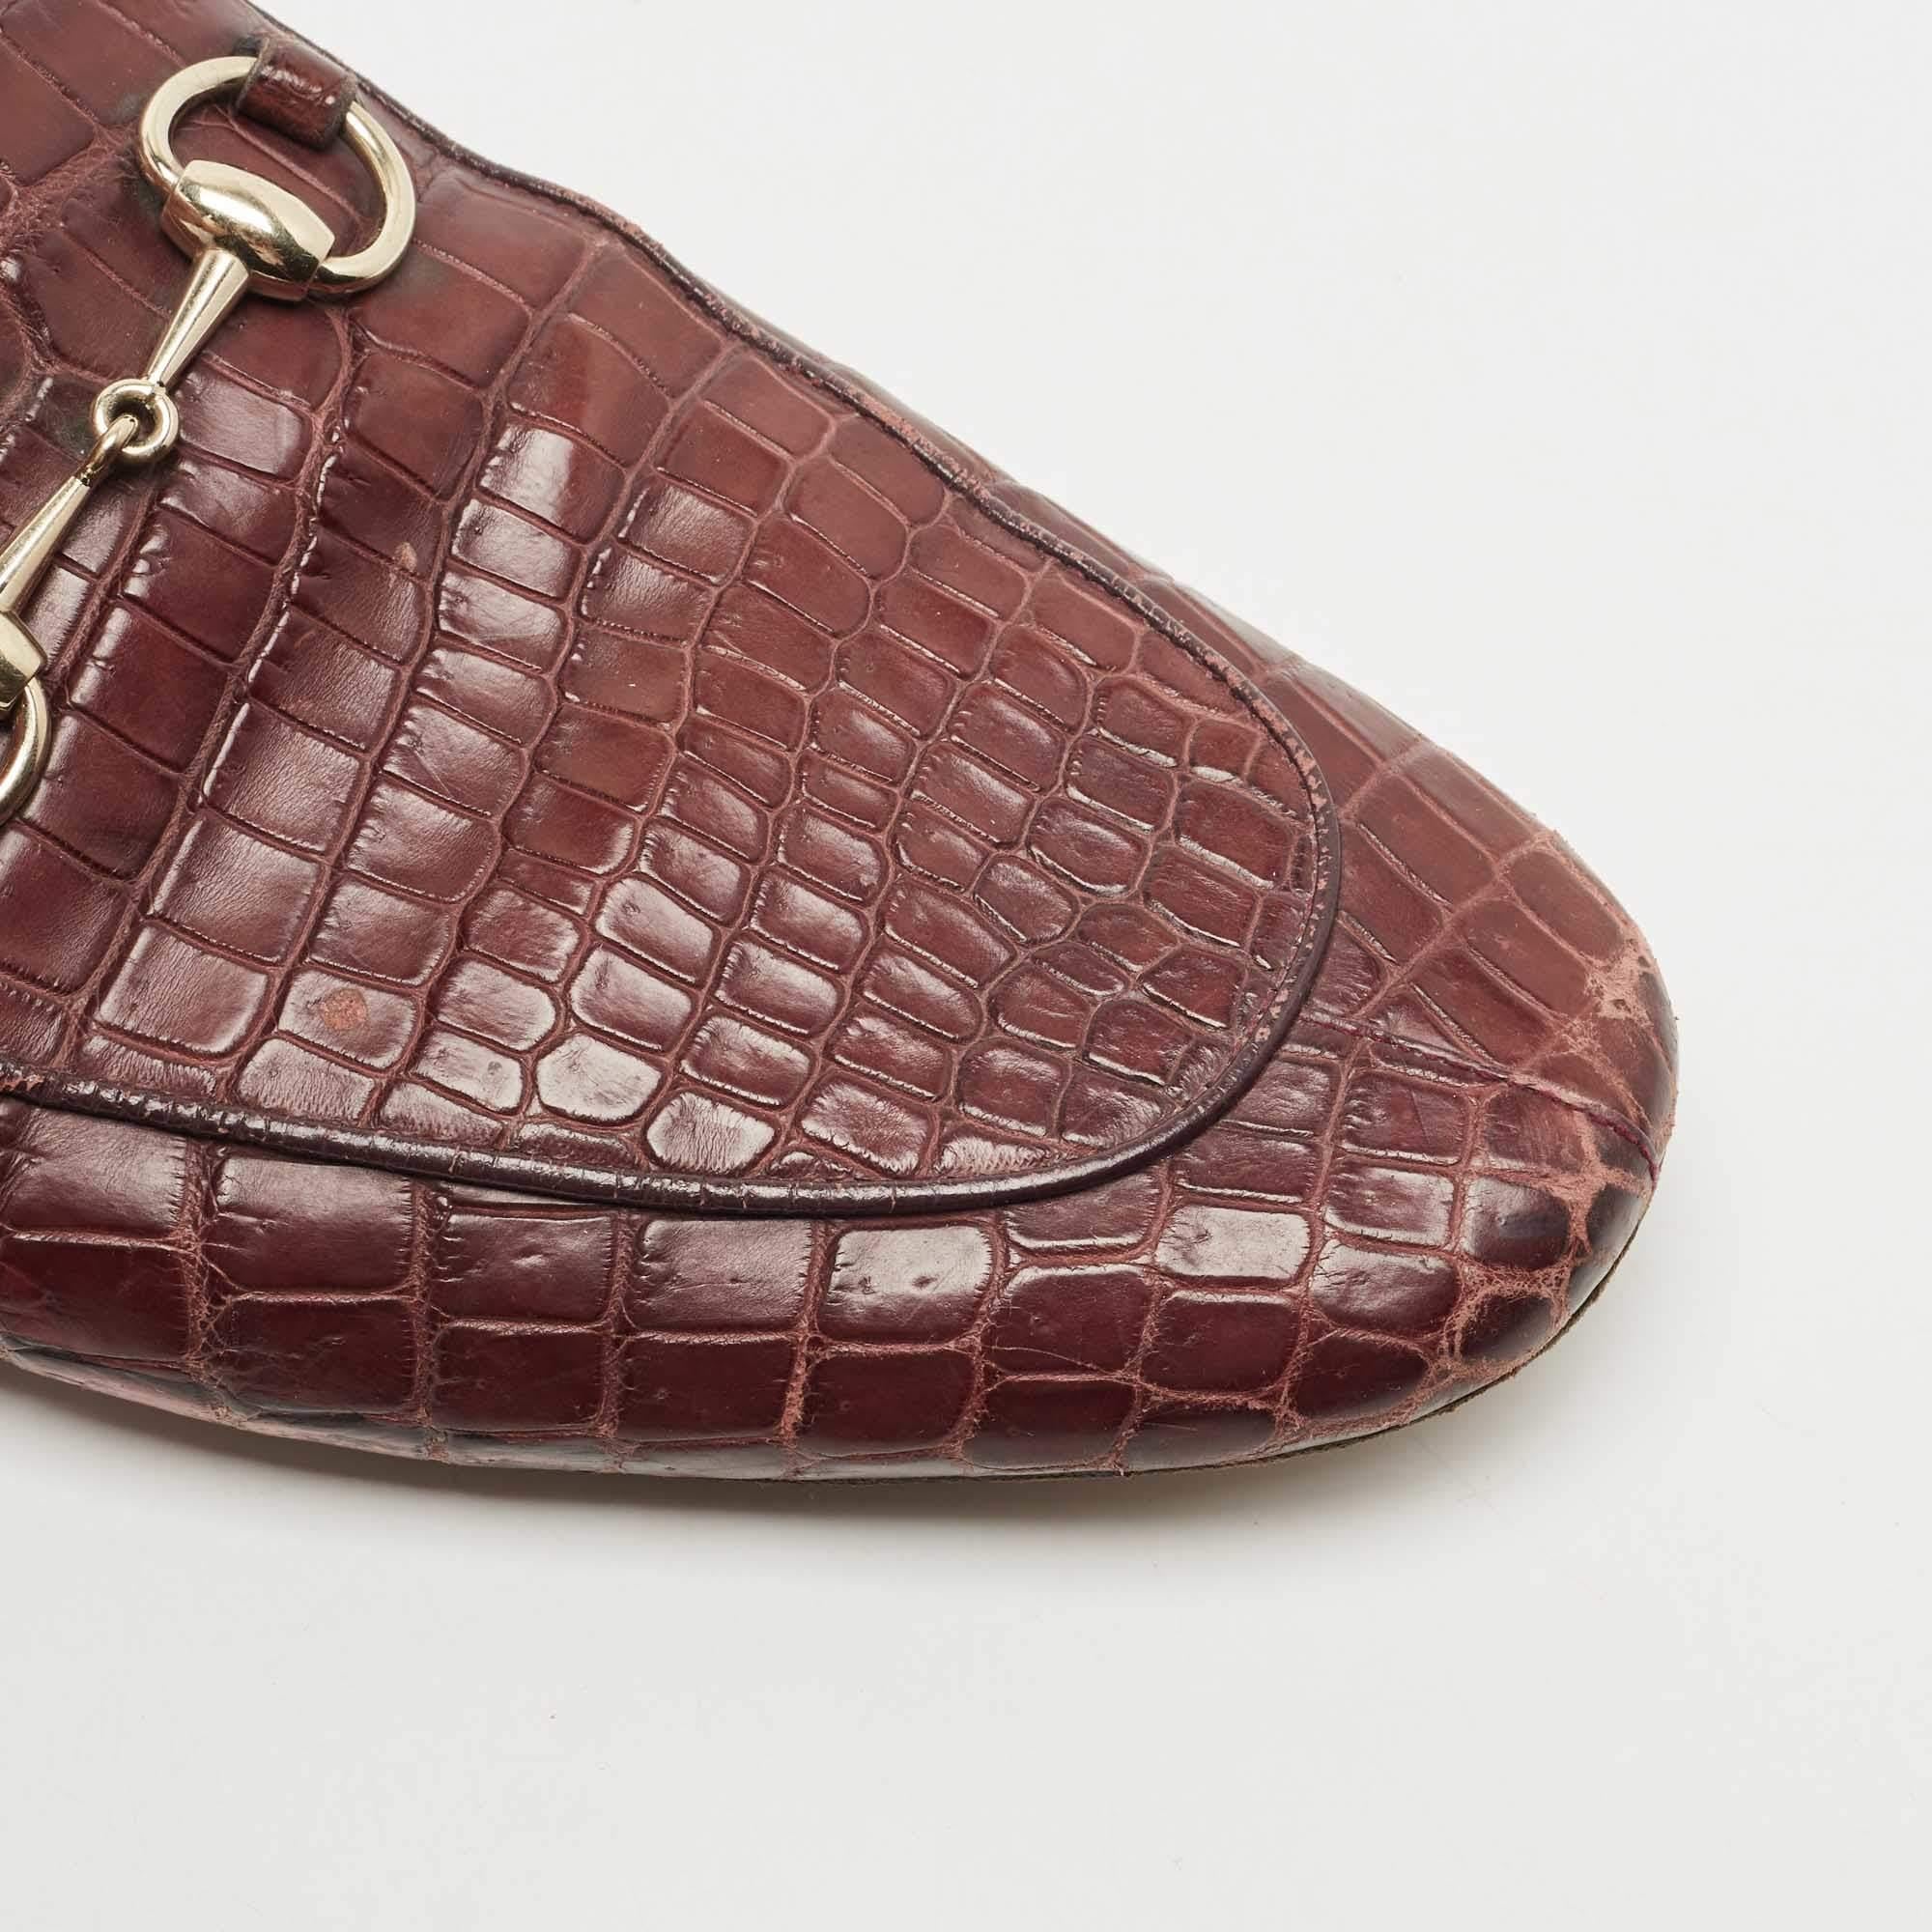 Gucci Burgundy Croc Embossed Leather Princetown Flat Mules Size 42.5 2